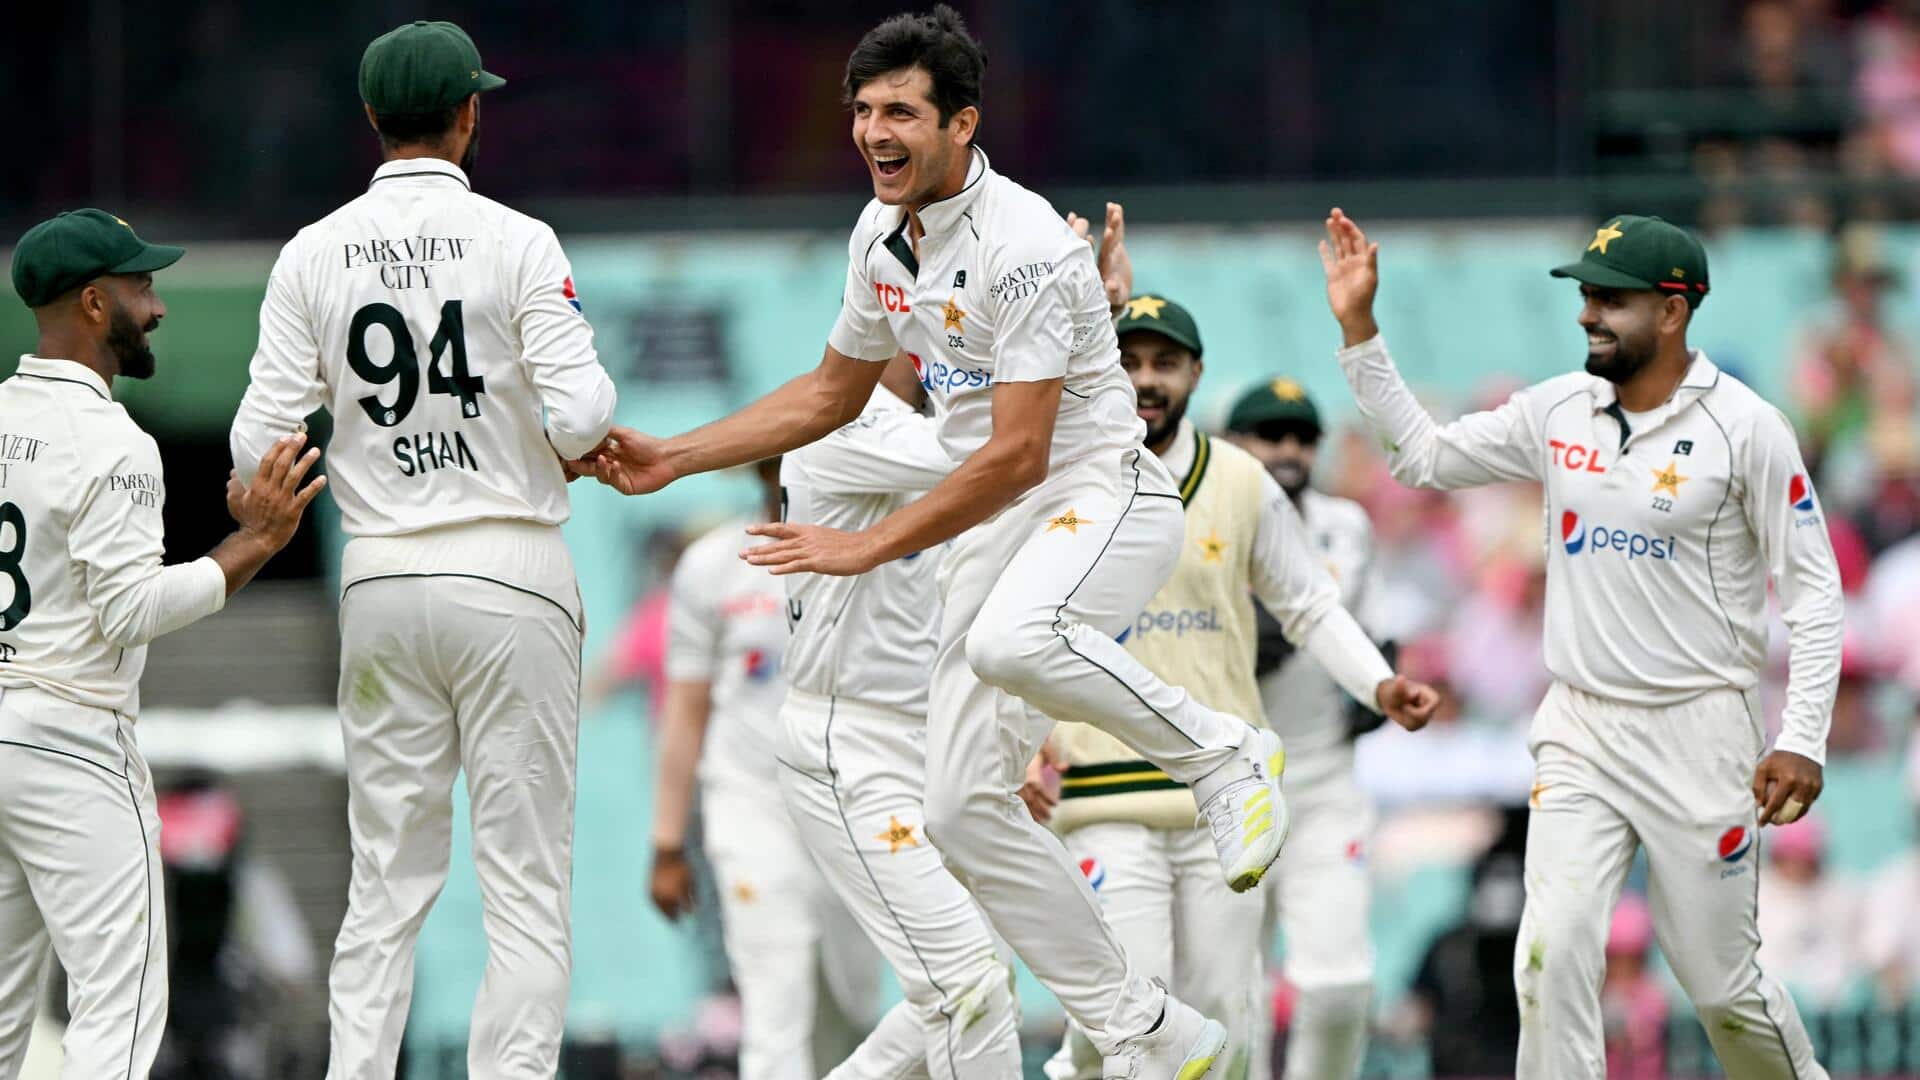 Australia closing in on victory over Pakistan at the SCG